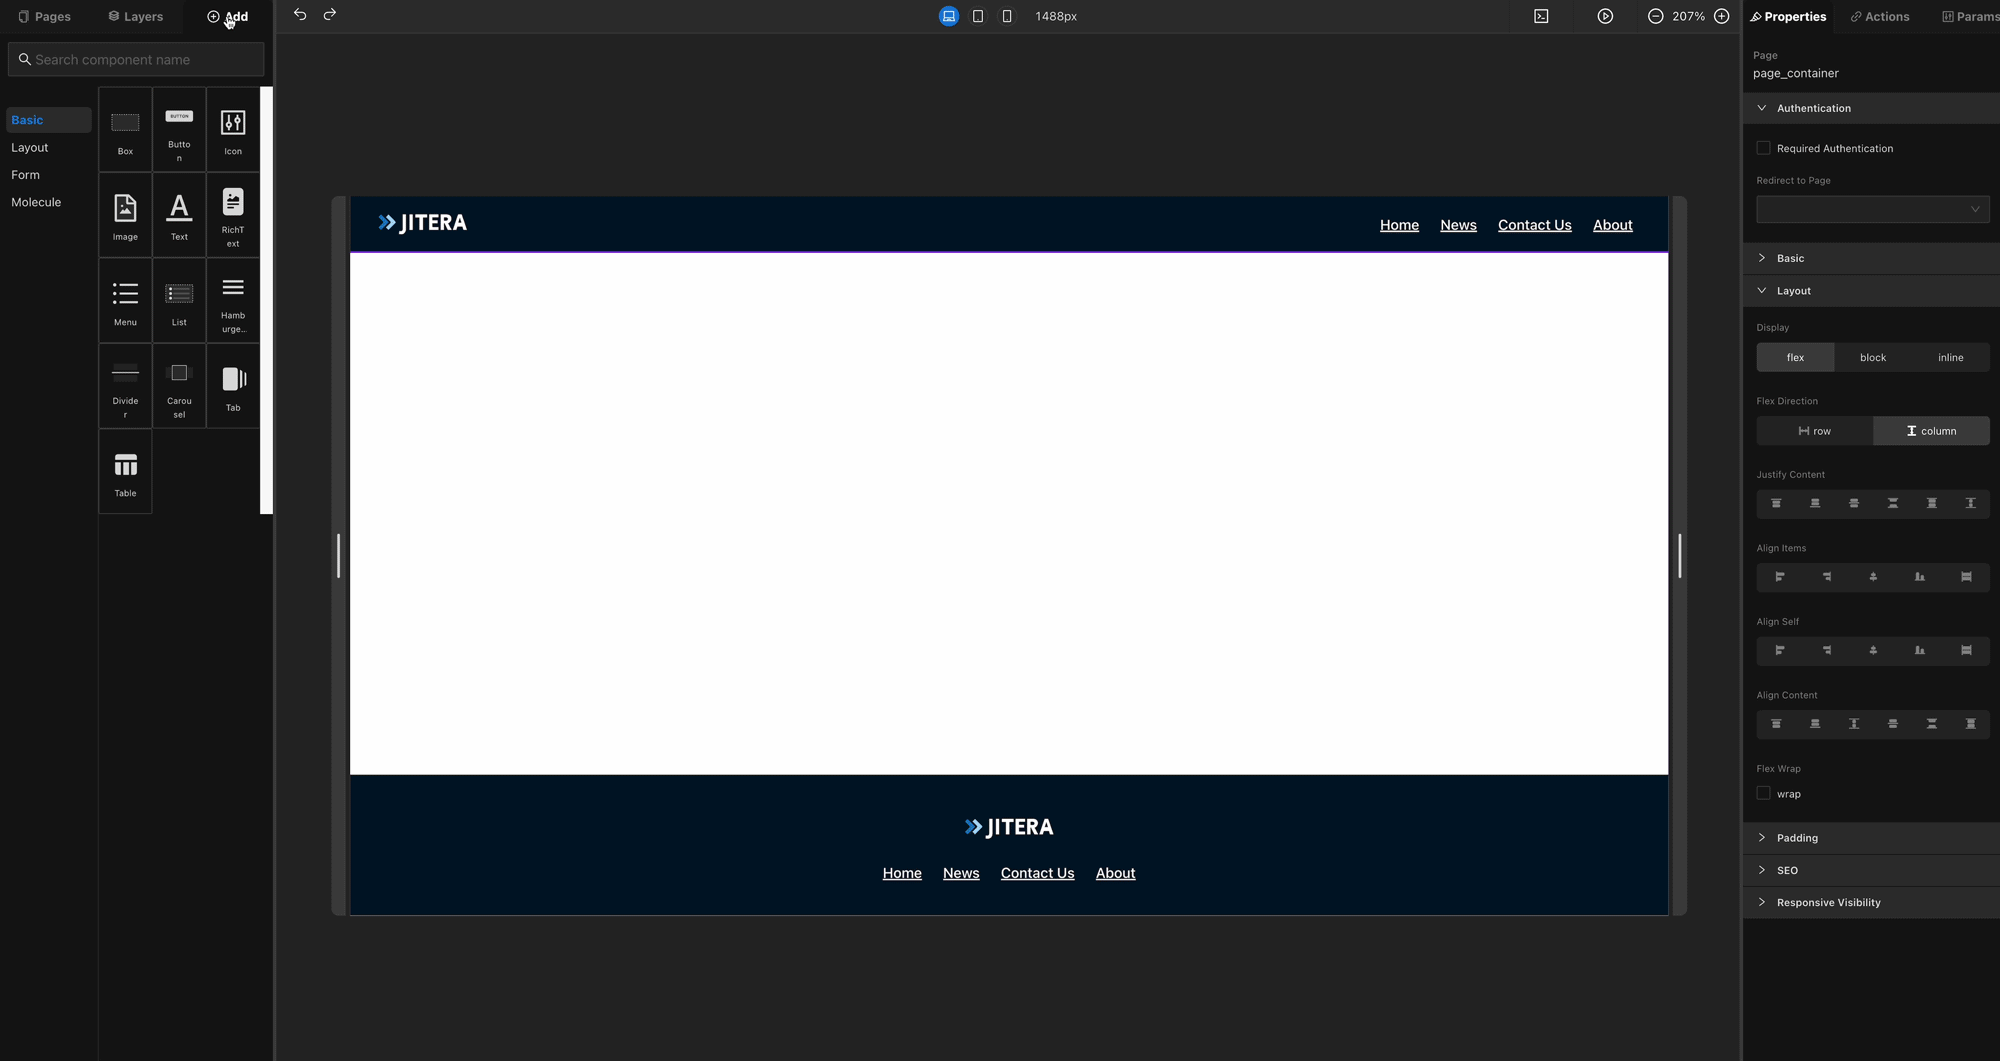 Setup the Web app by drag and drop